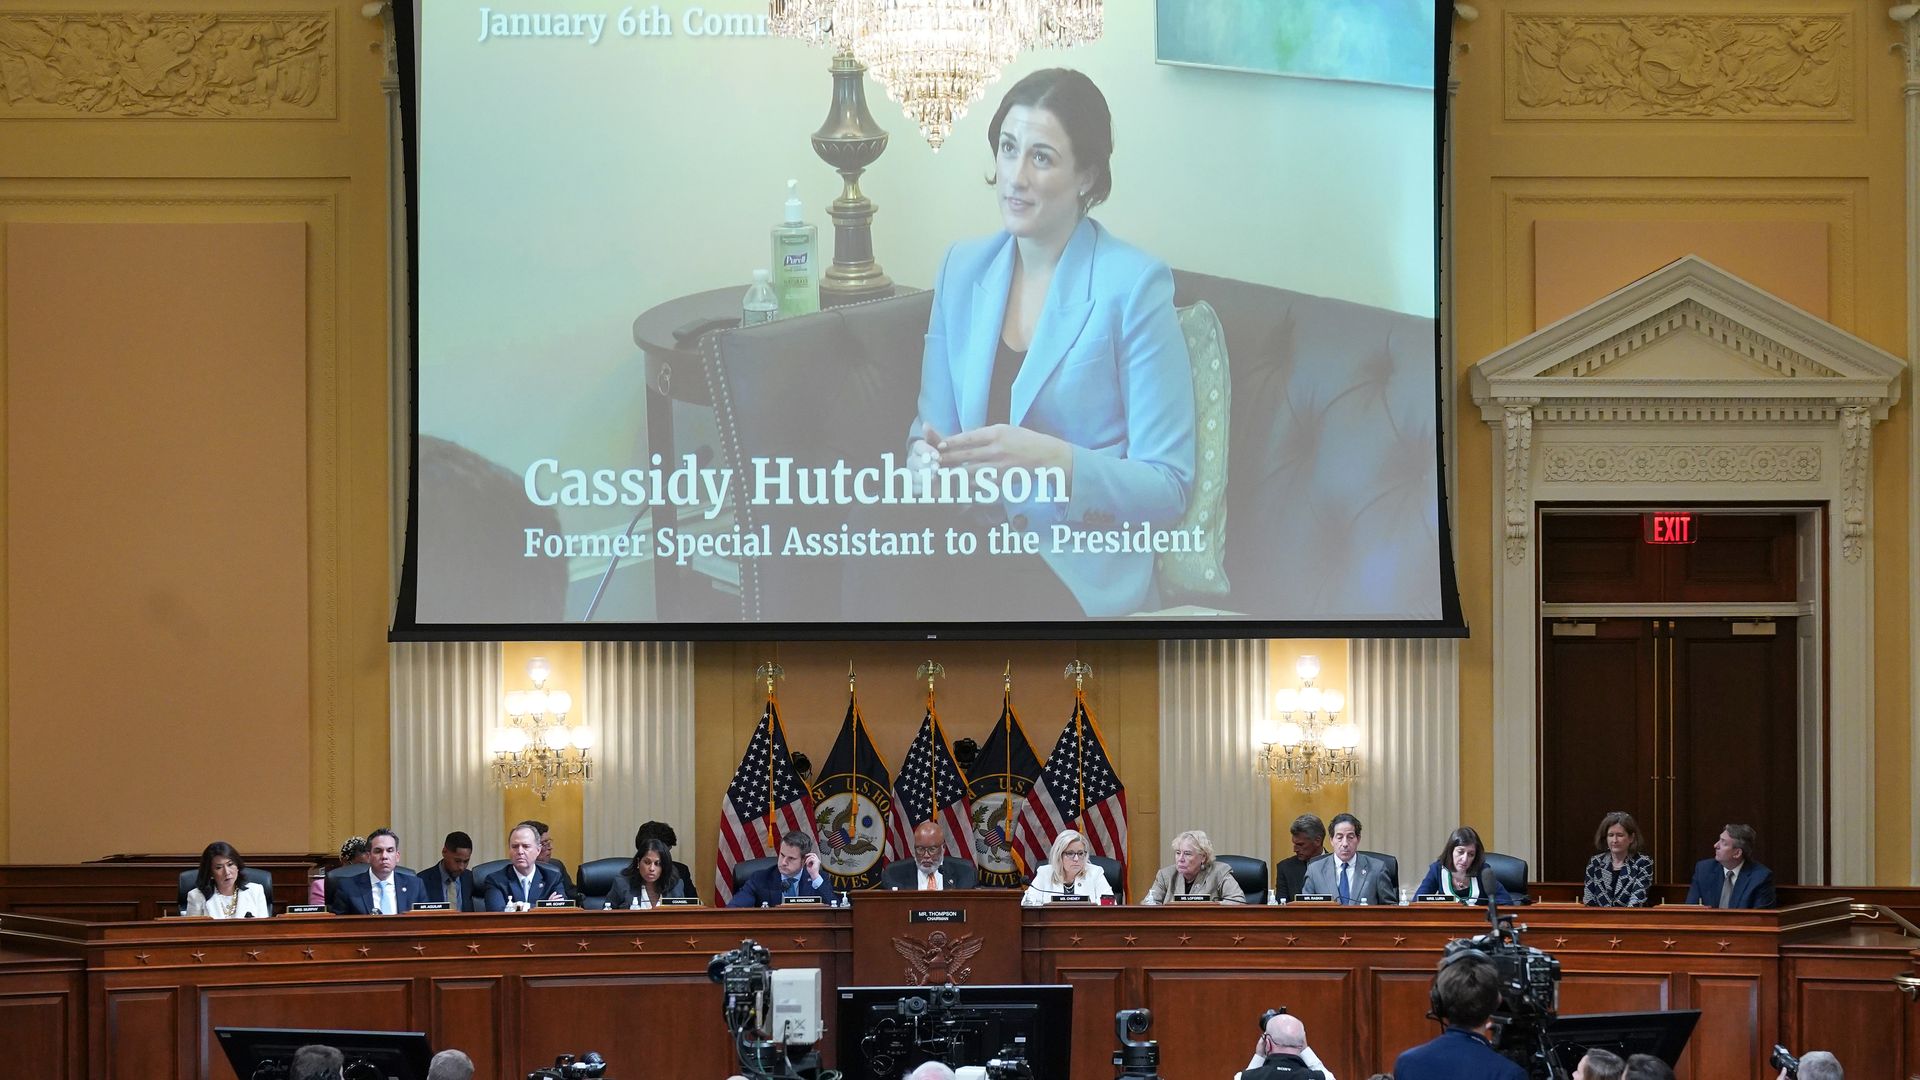  An image of Cassidy Hutchinson is shown during the fifth hearing held by the  January 6th committee